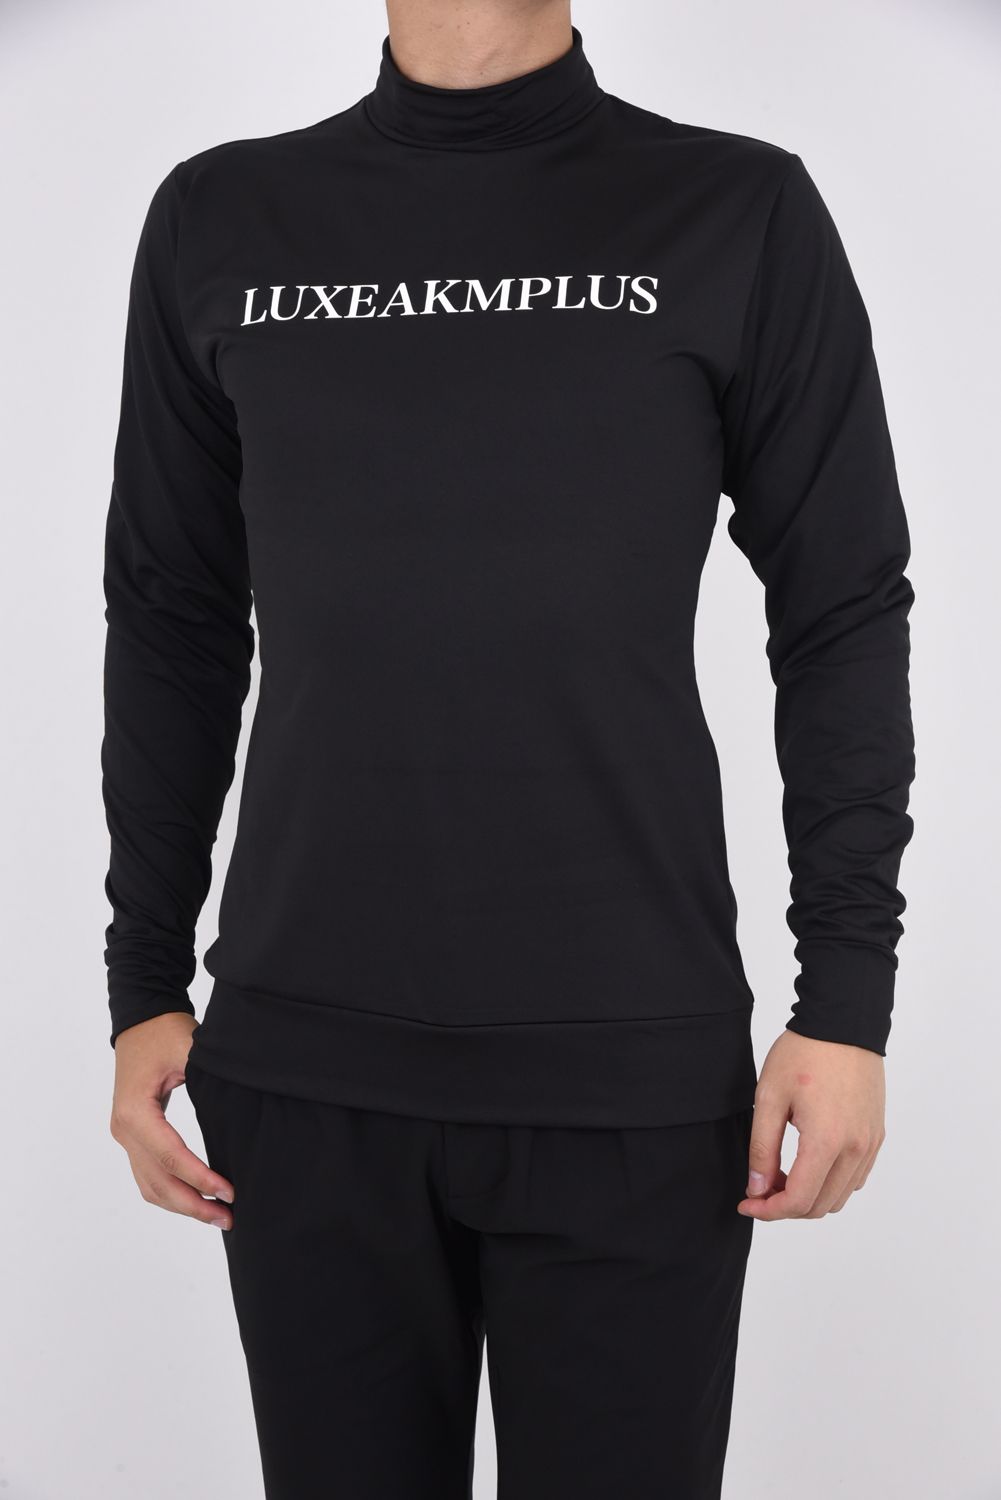 LUXEAKMPLUS - LUXE AKM PLUS LOGO HIGH NECK T-SHIRTS / フロントロゴ ...